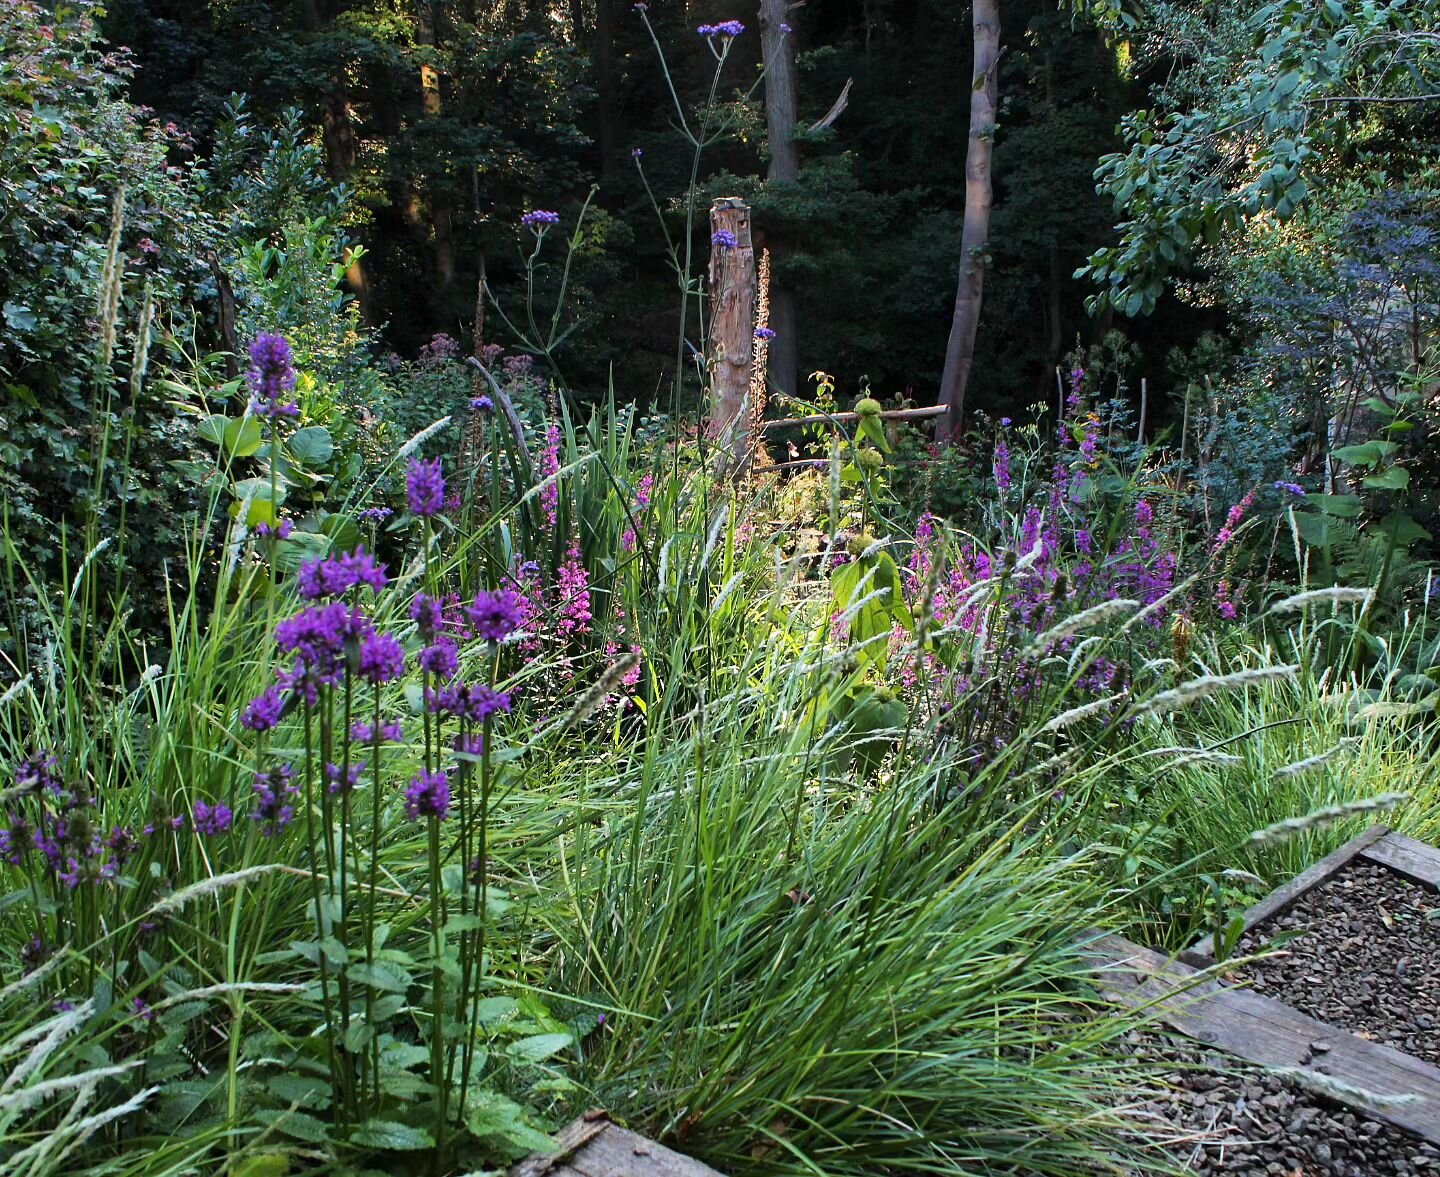 Back home and there was some nice late summer light in the garden this morning. Lythrum virgatum, Sesleria autumnalis and Stachys 'Hummelo' all popping in the light.
.
.
#naturalisticgarden #naturalisticplanting #perennialplanting #wildlifegarden #ec